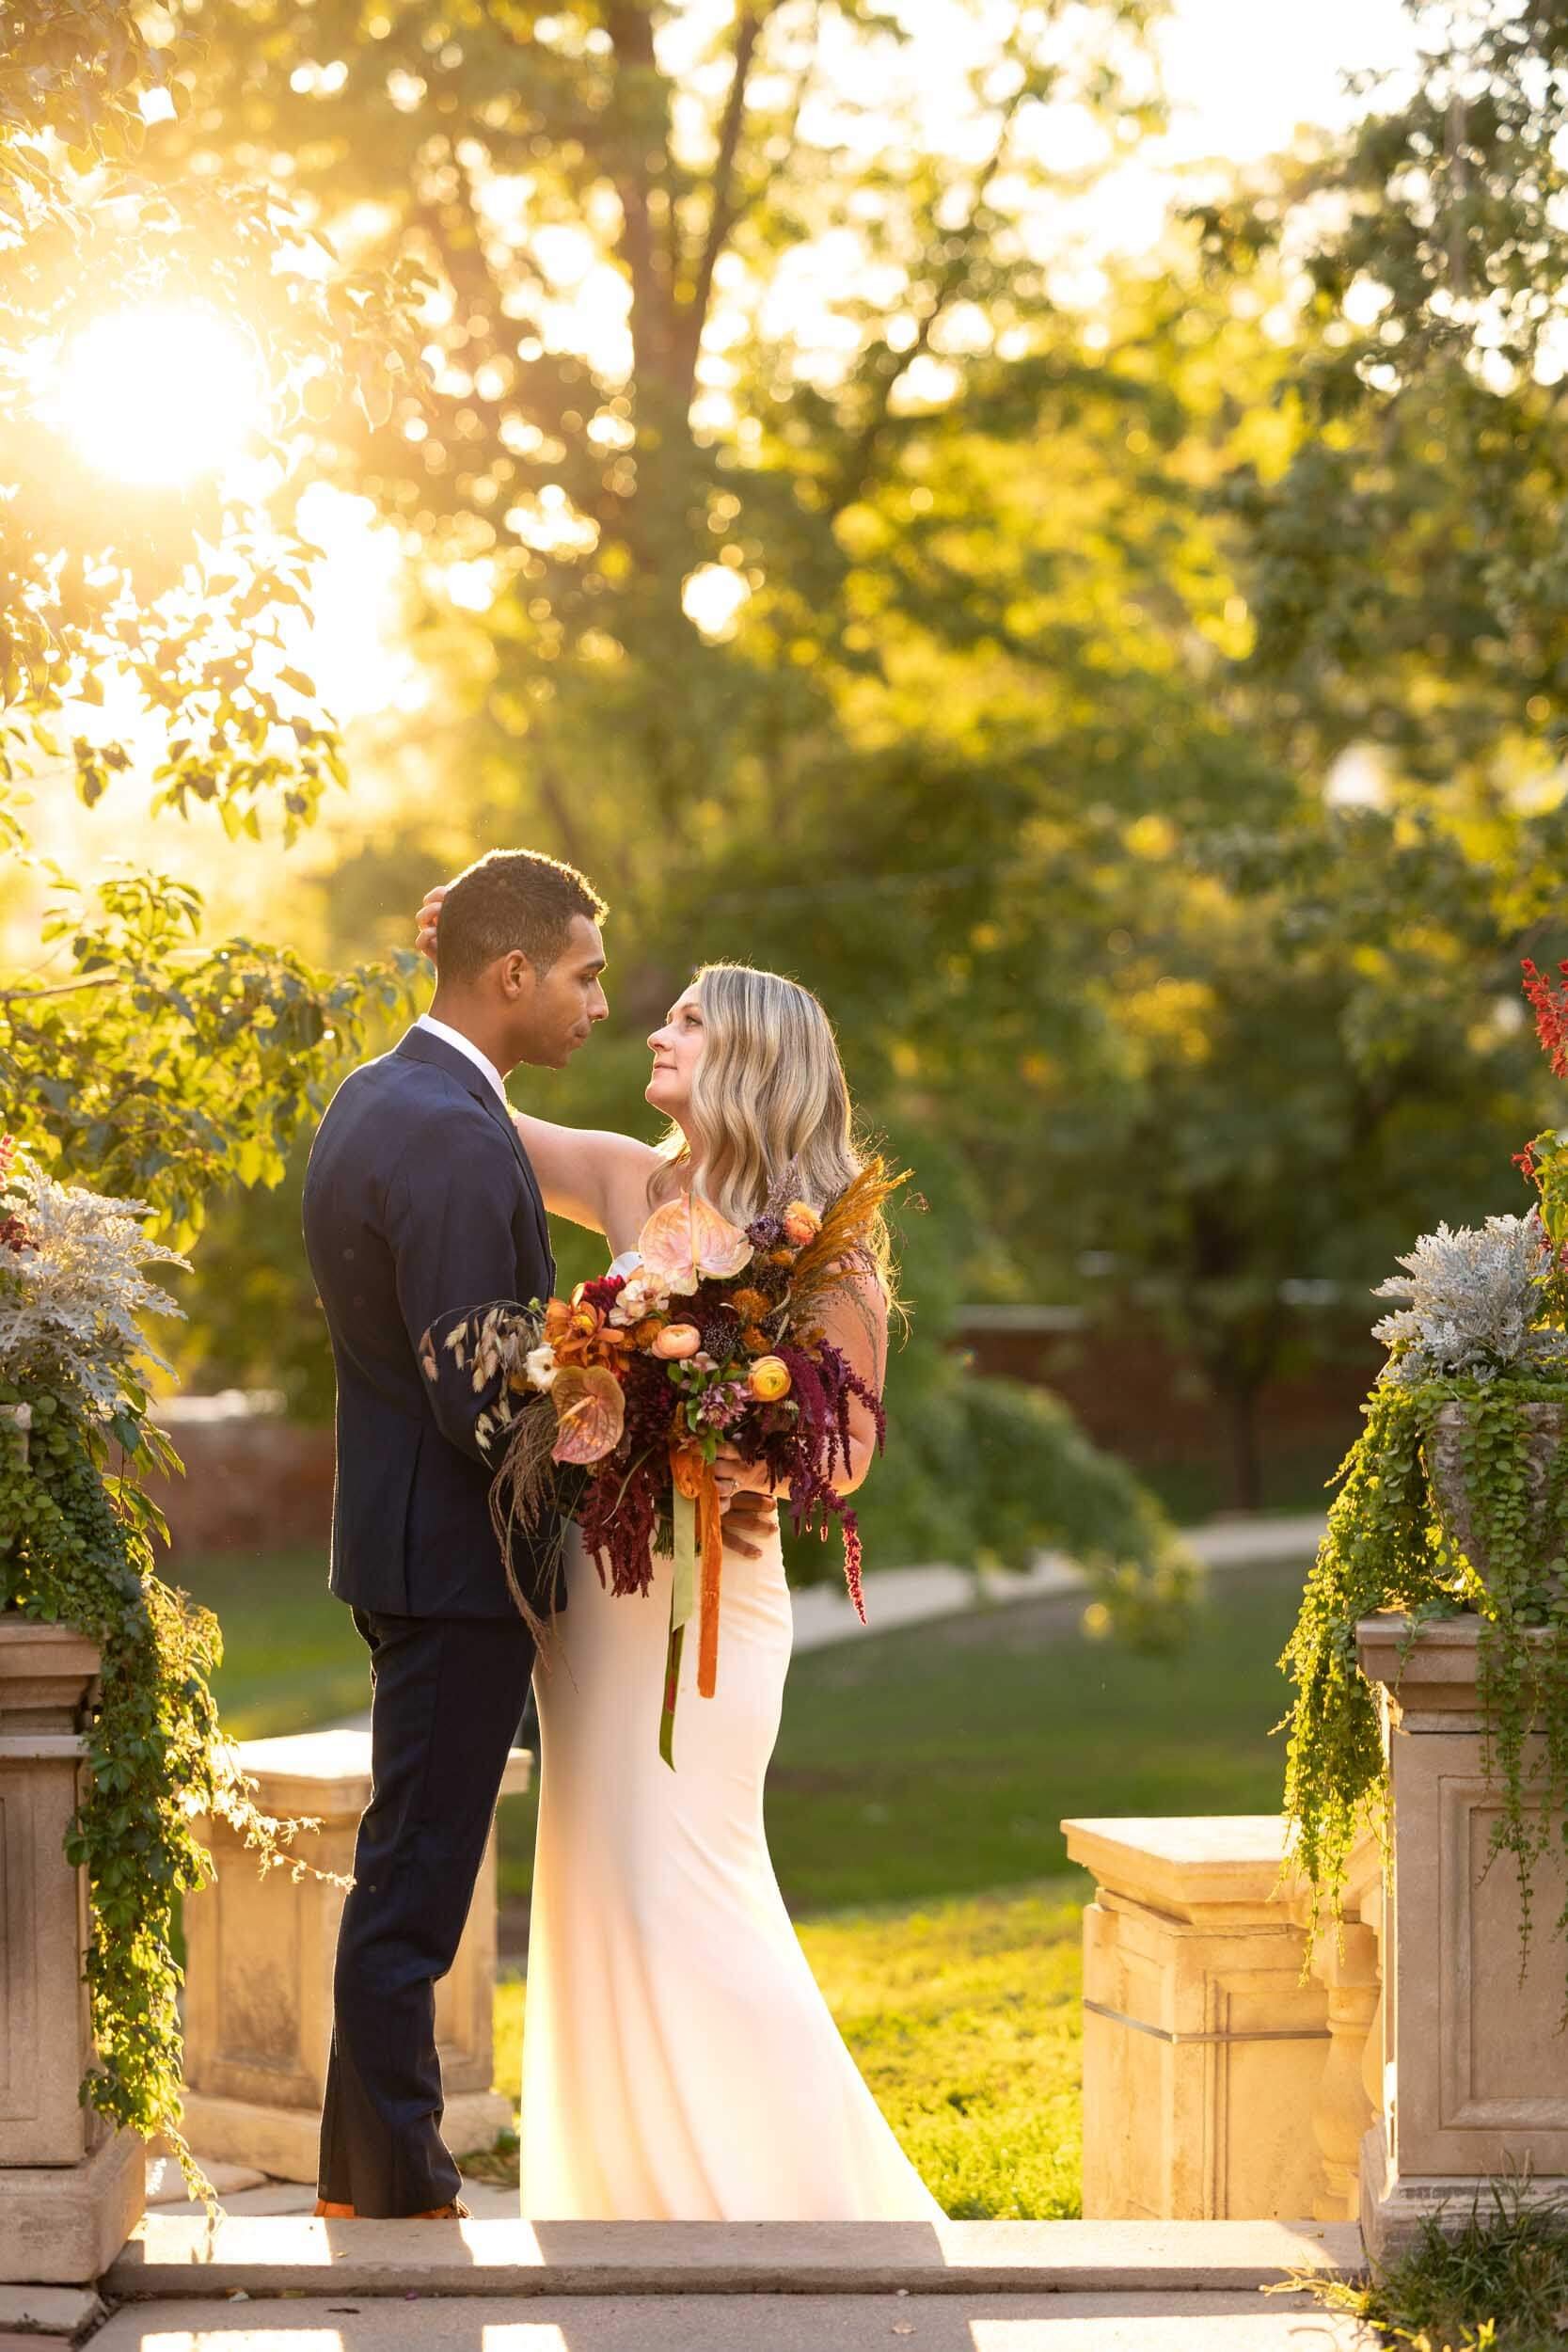 Colorful wedding portrait at sunset at a Denver Mansion Wedding  in Colorado by CliftonMarie Photography